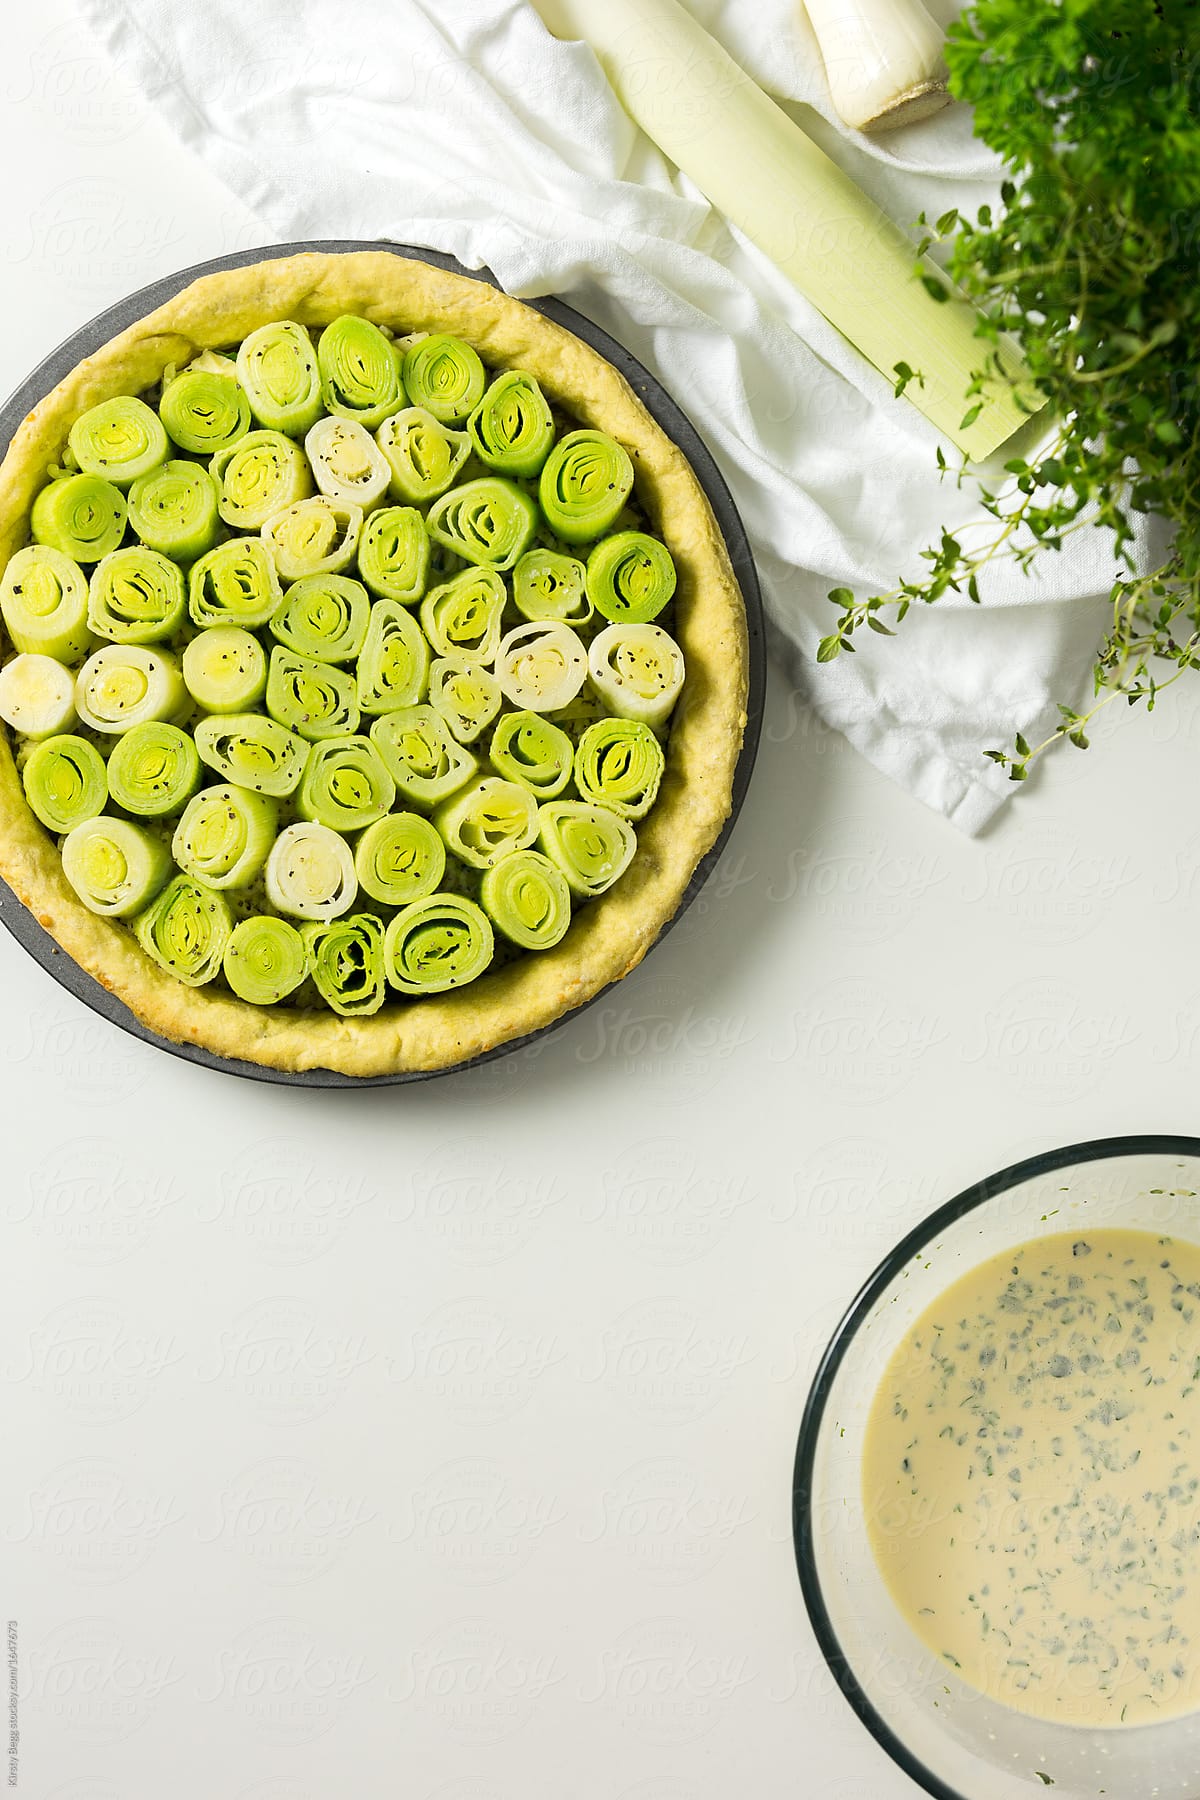 Stage in preparing a leek and cheese tart